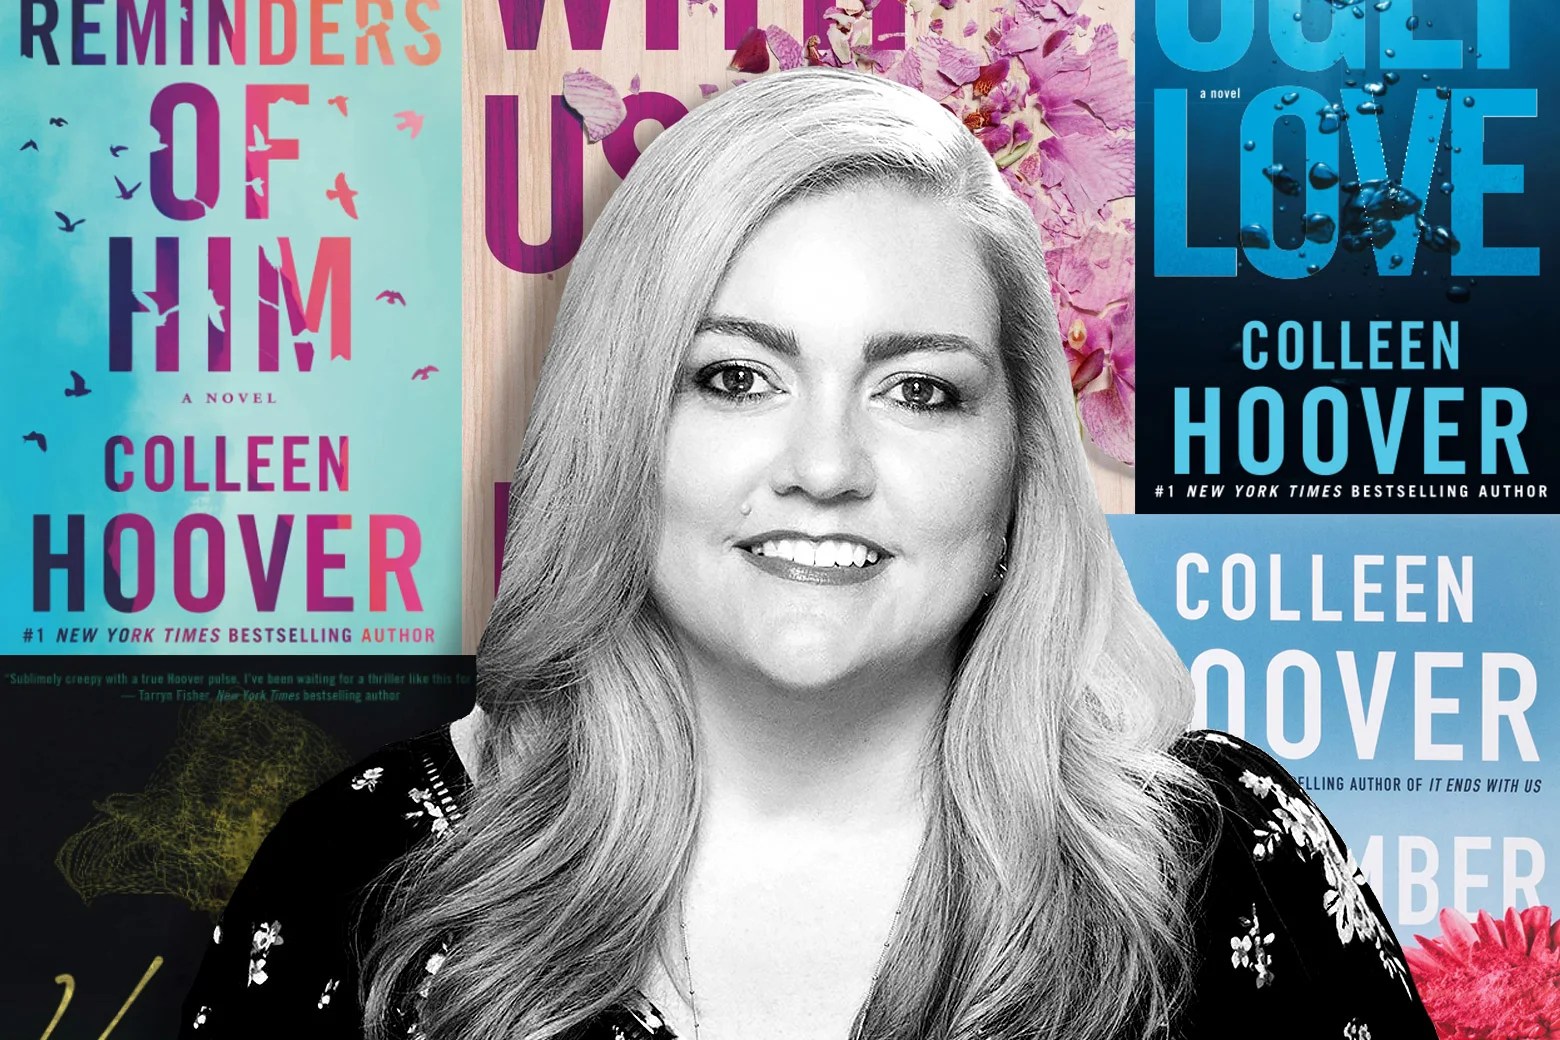 Colleen Hoover books The author’s success is due to much more than